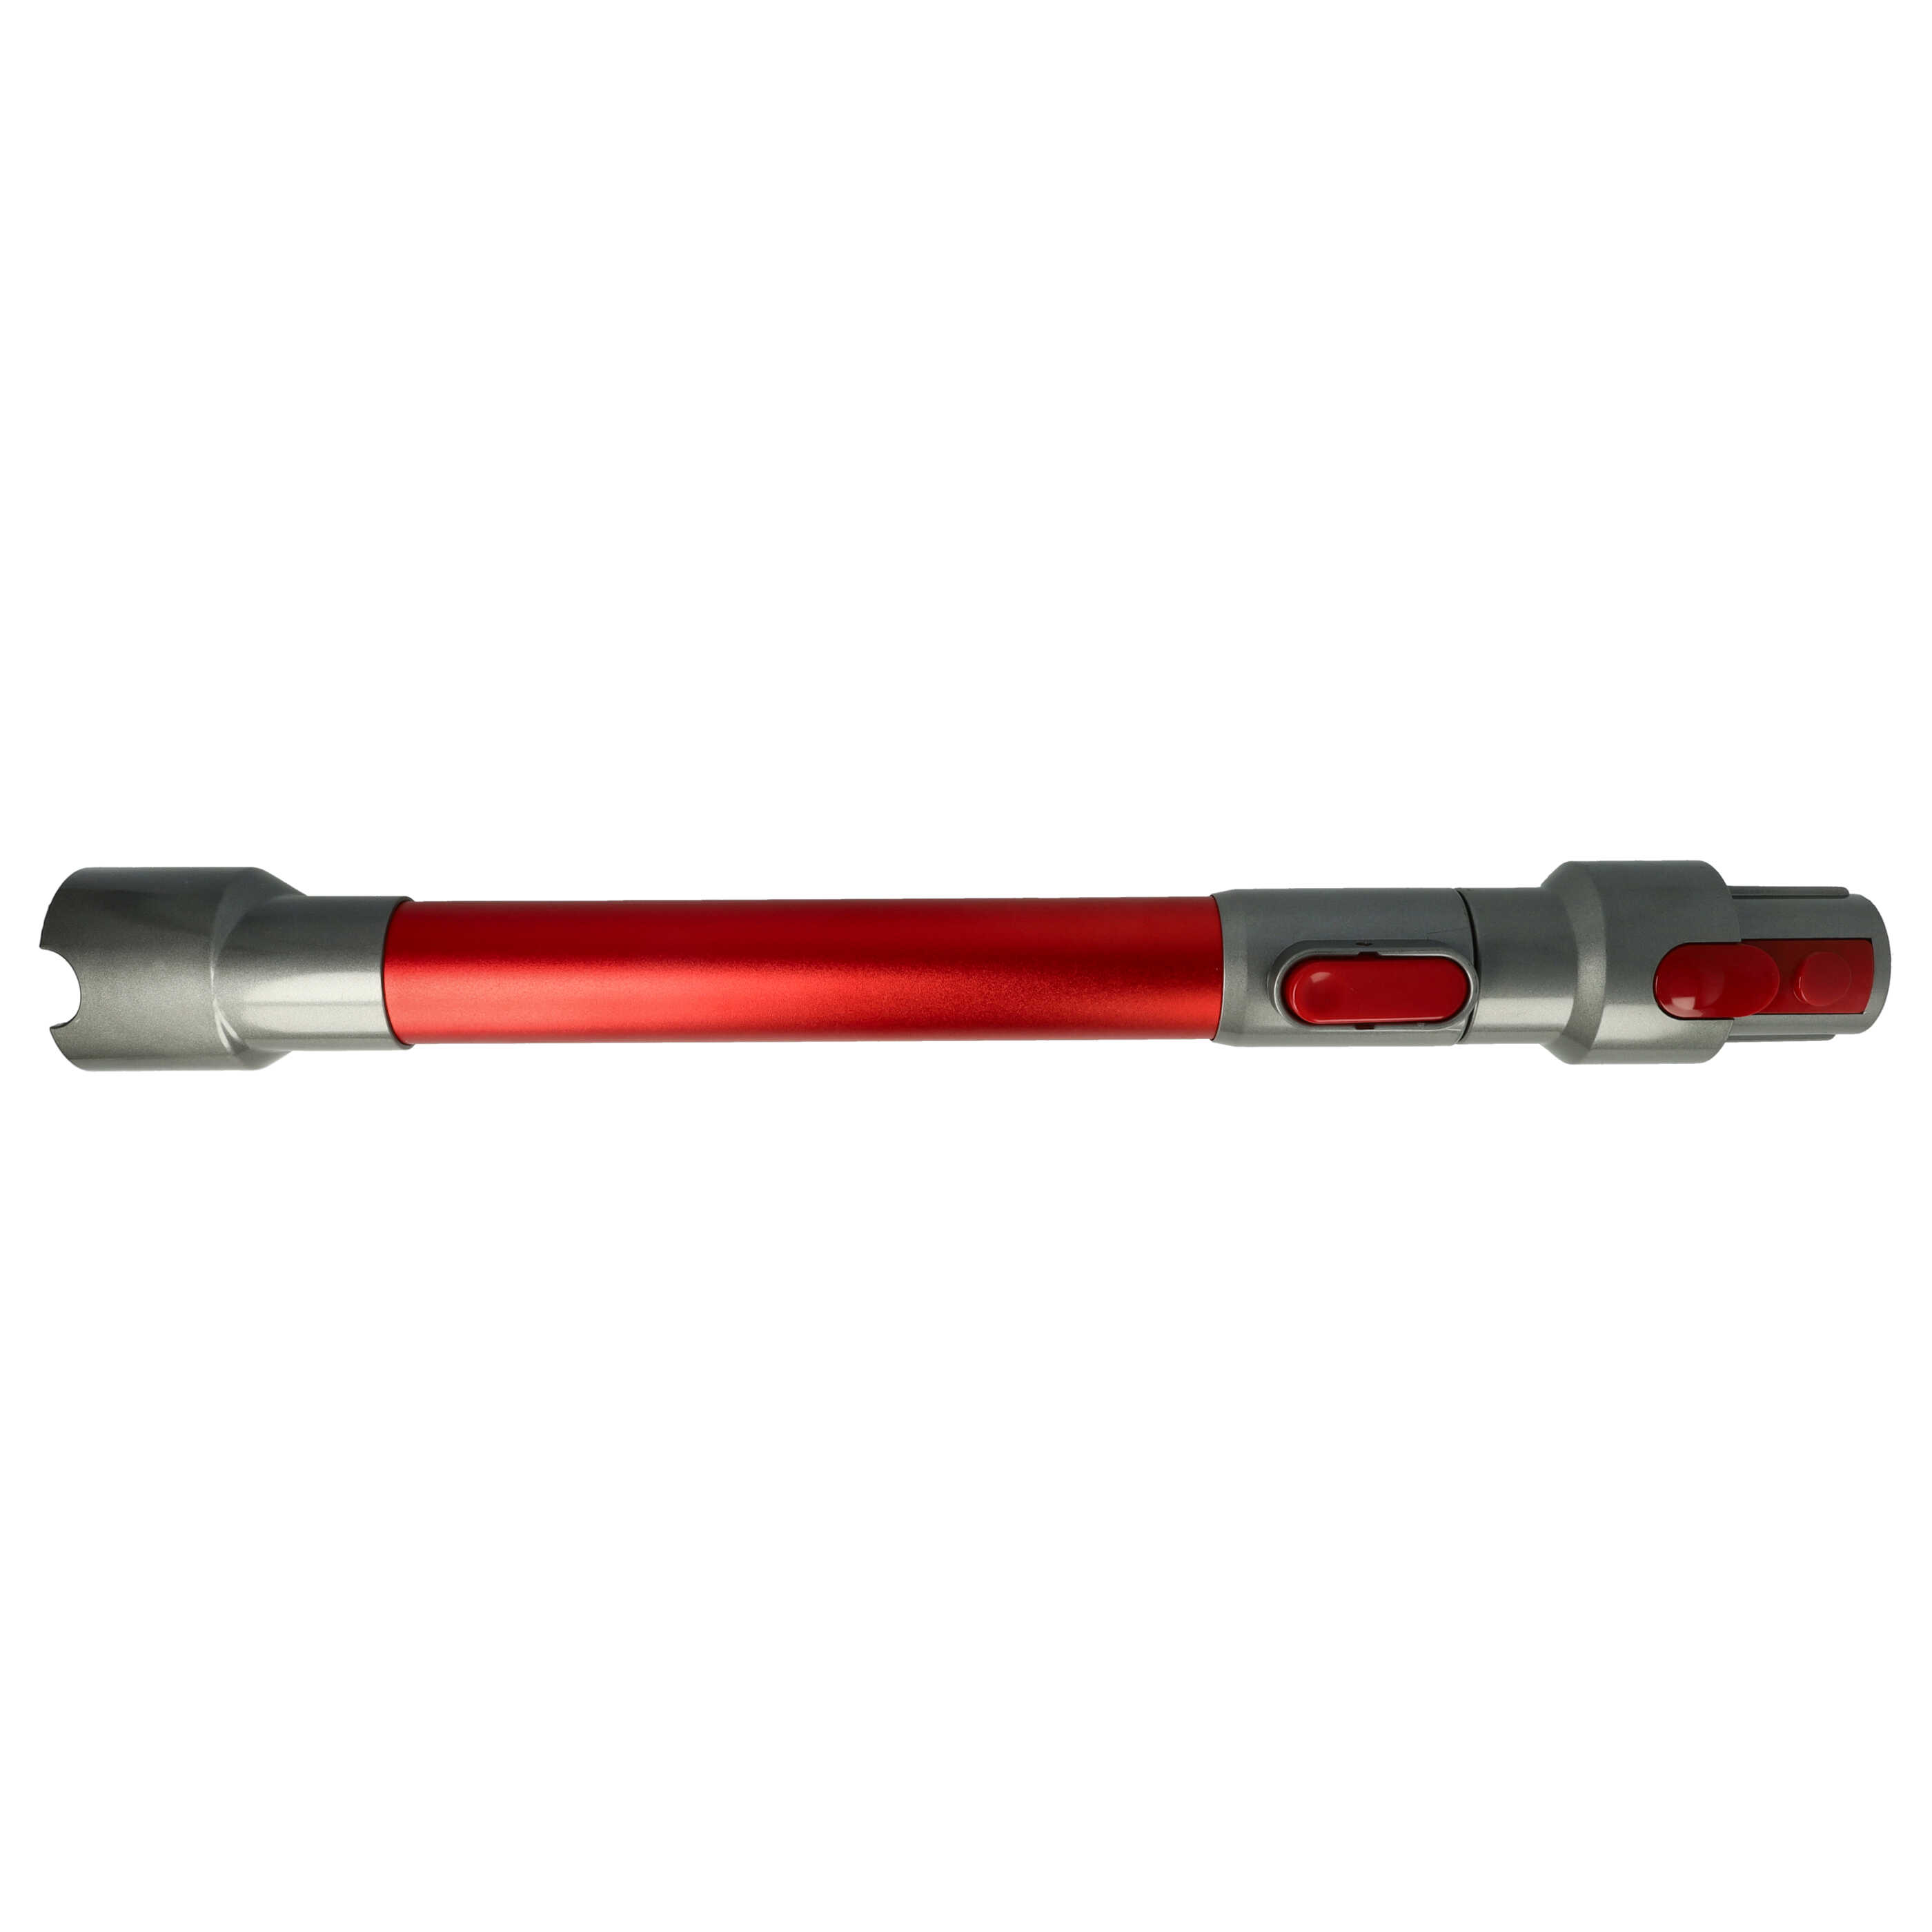 Tube suitable for Dyson StaubsaugerSV10 Vacuum Cleaner - Length: 44.5 - 66.5 cm, red